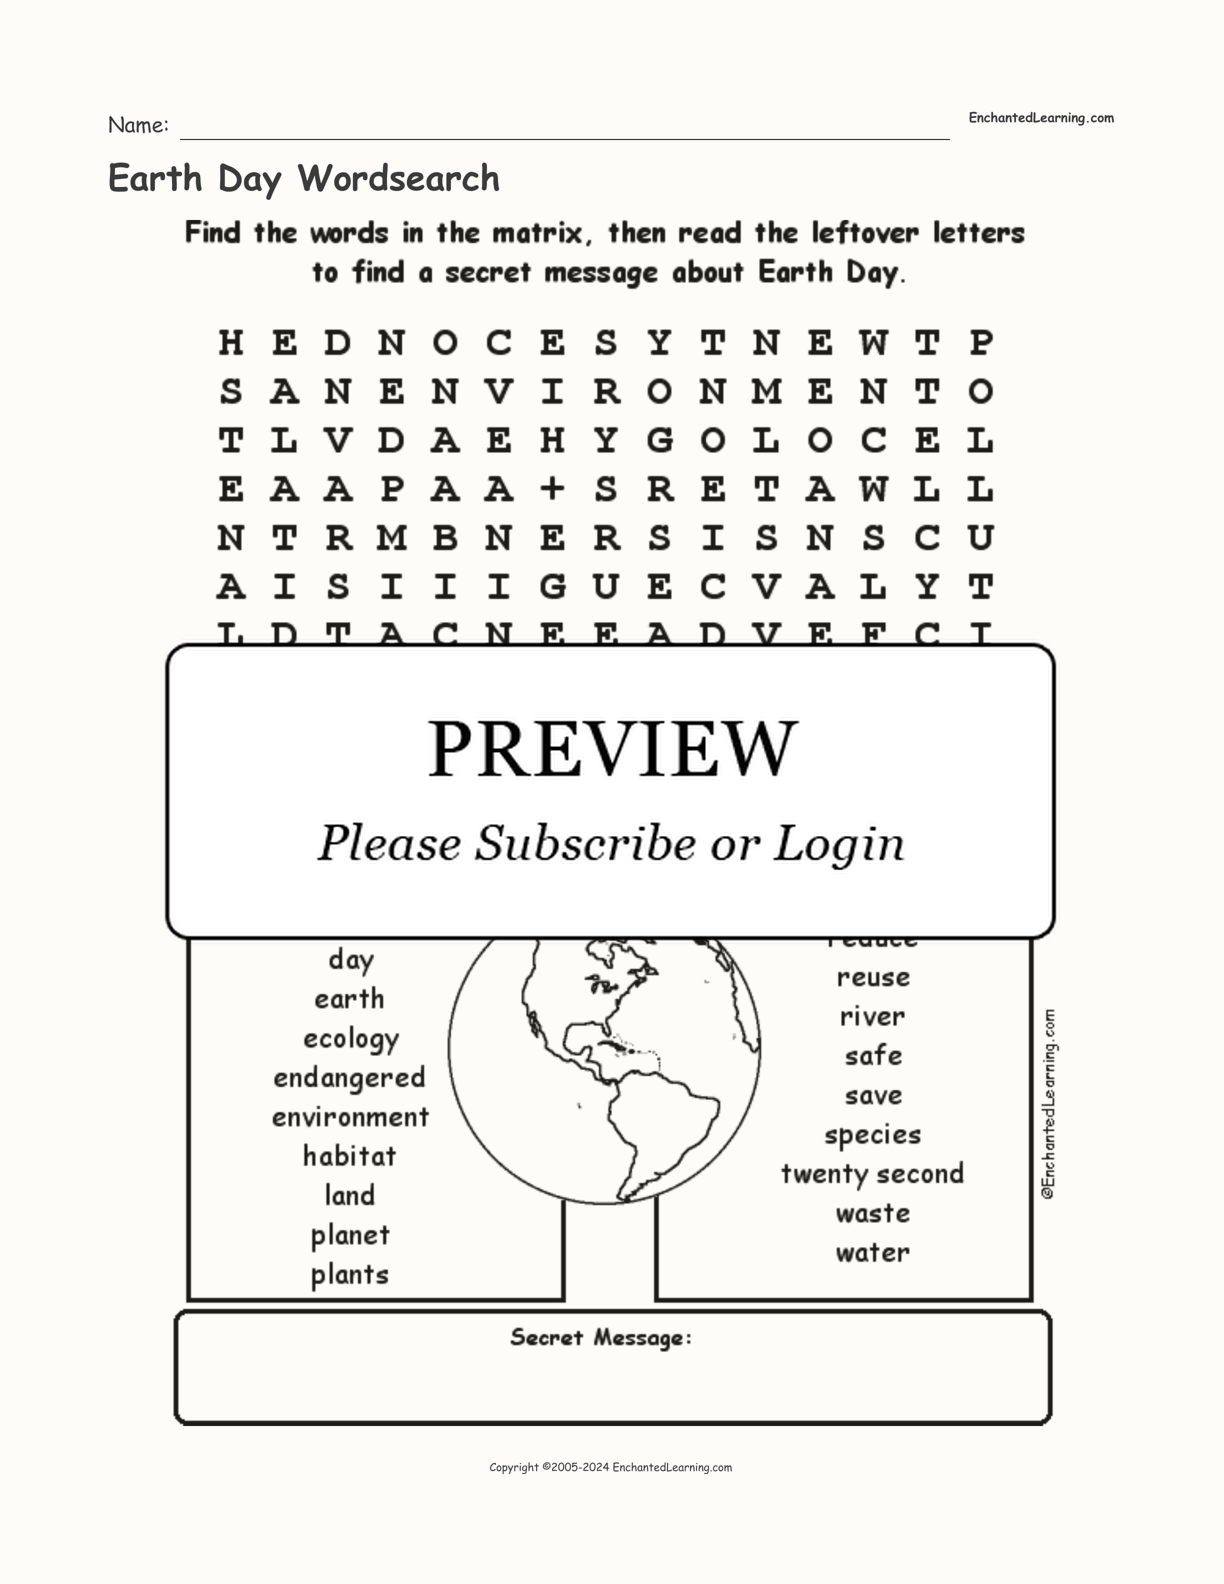 Earth Day Wordsearch interactive worksheet page 1